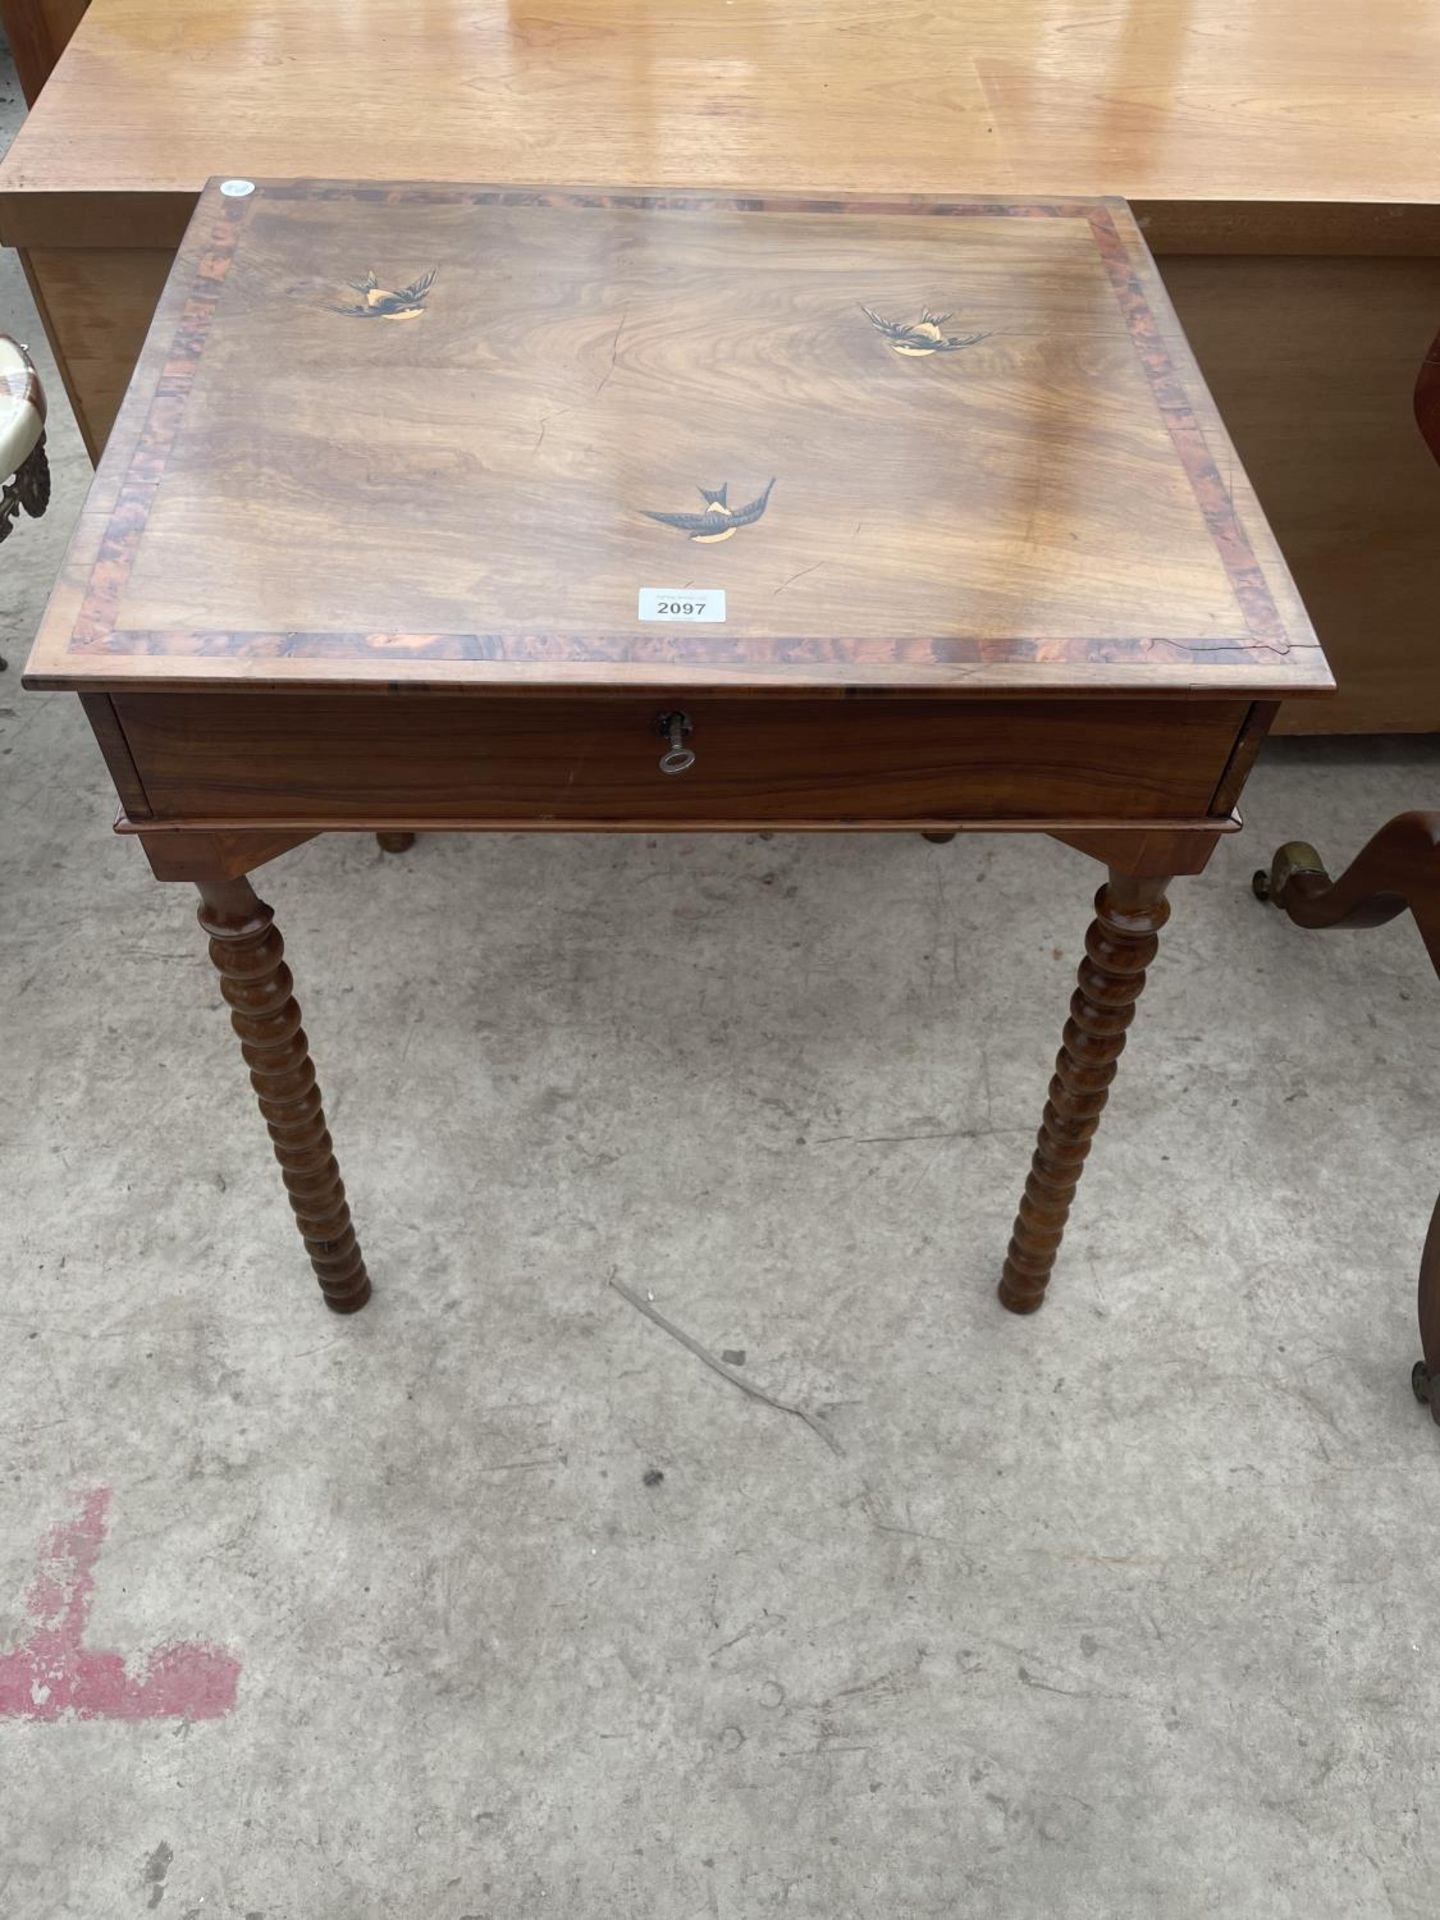 A SMALL WALNUT AND INLAID TABLE WITH SWALLOW DECORATION ON TURNED LEGS WITH SINGLE DRAWER, 22X17.5"